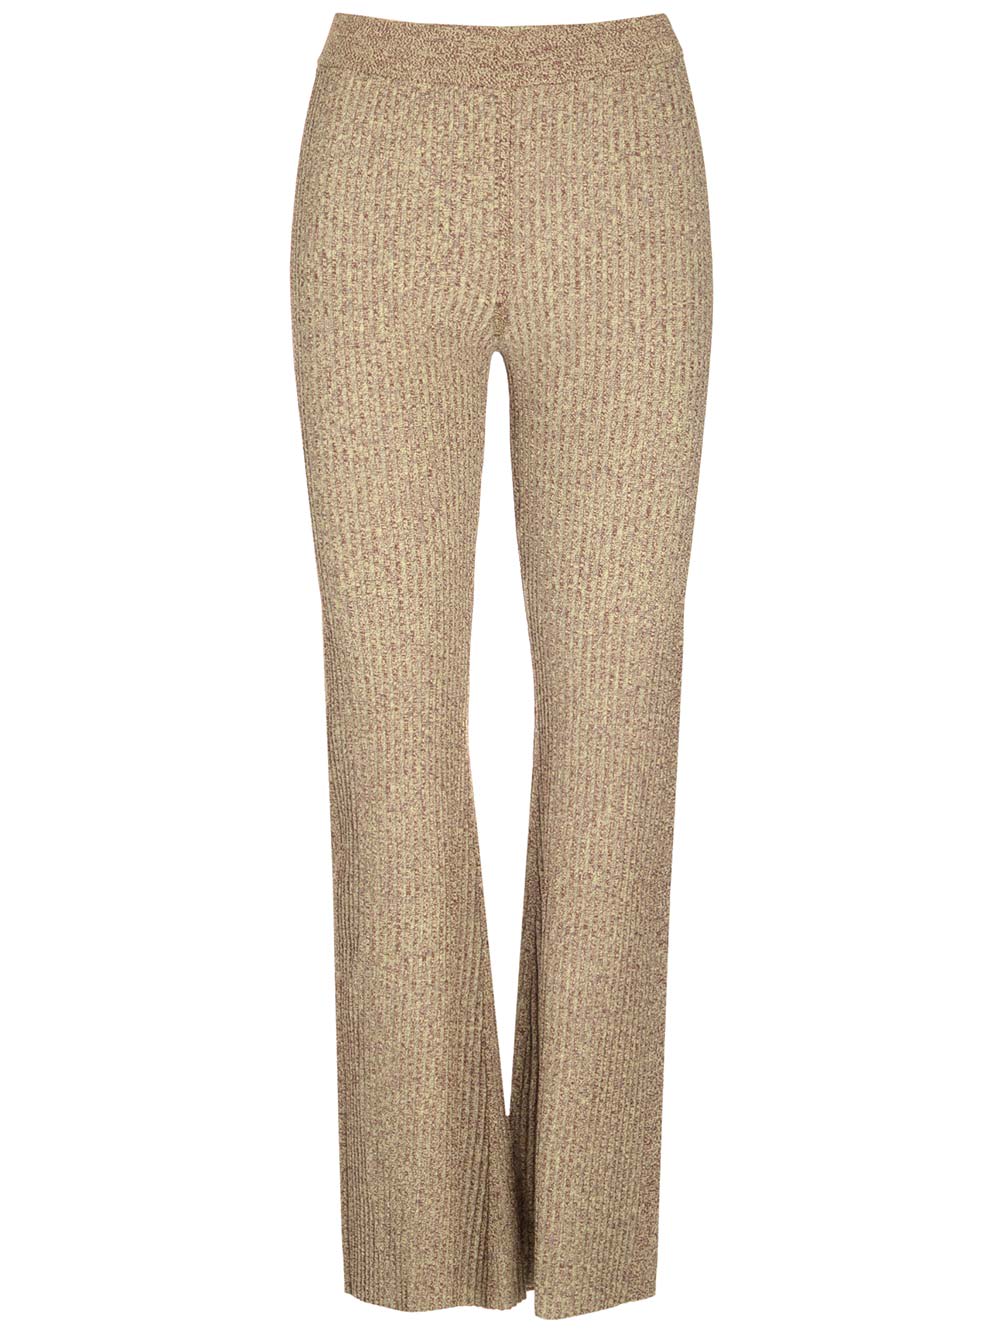 Stretch Knit Trousers